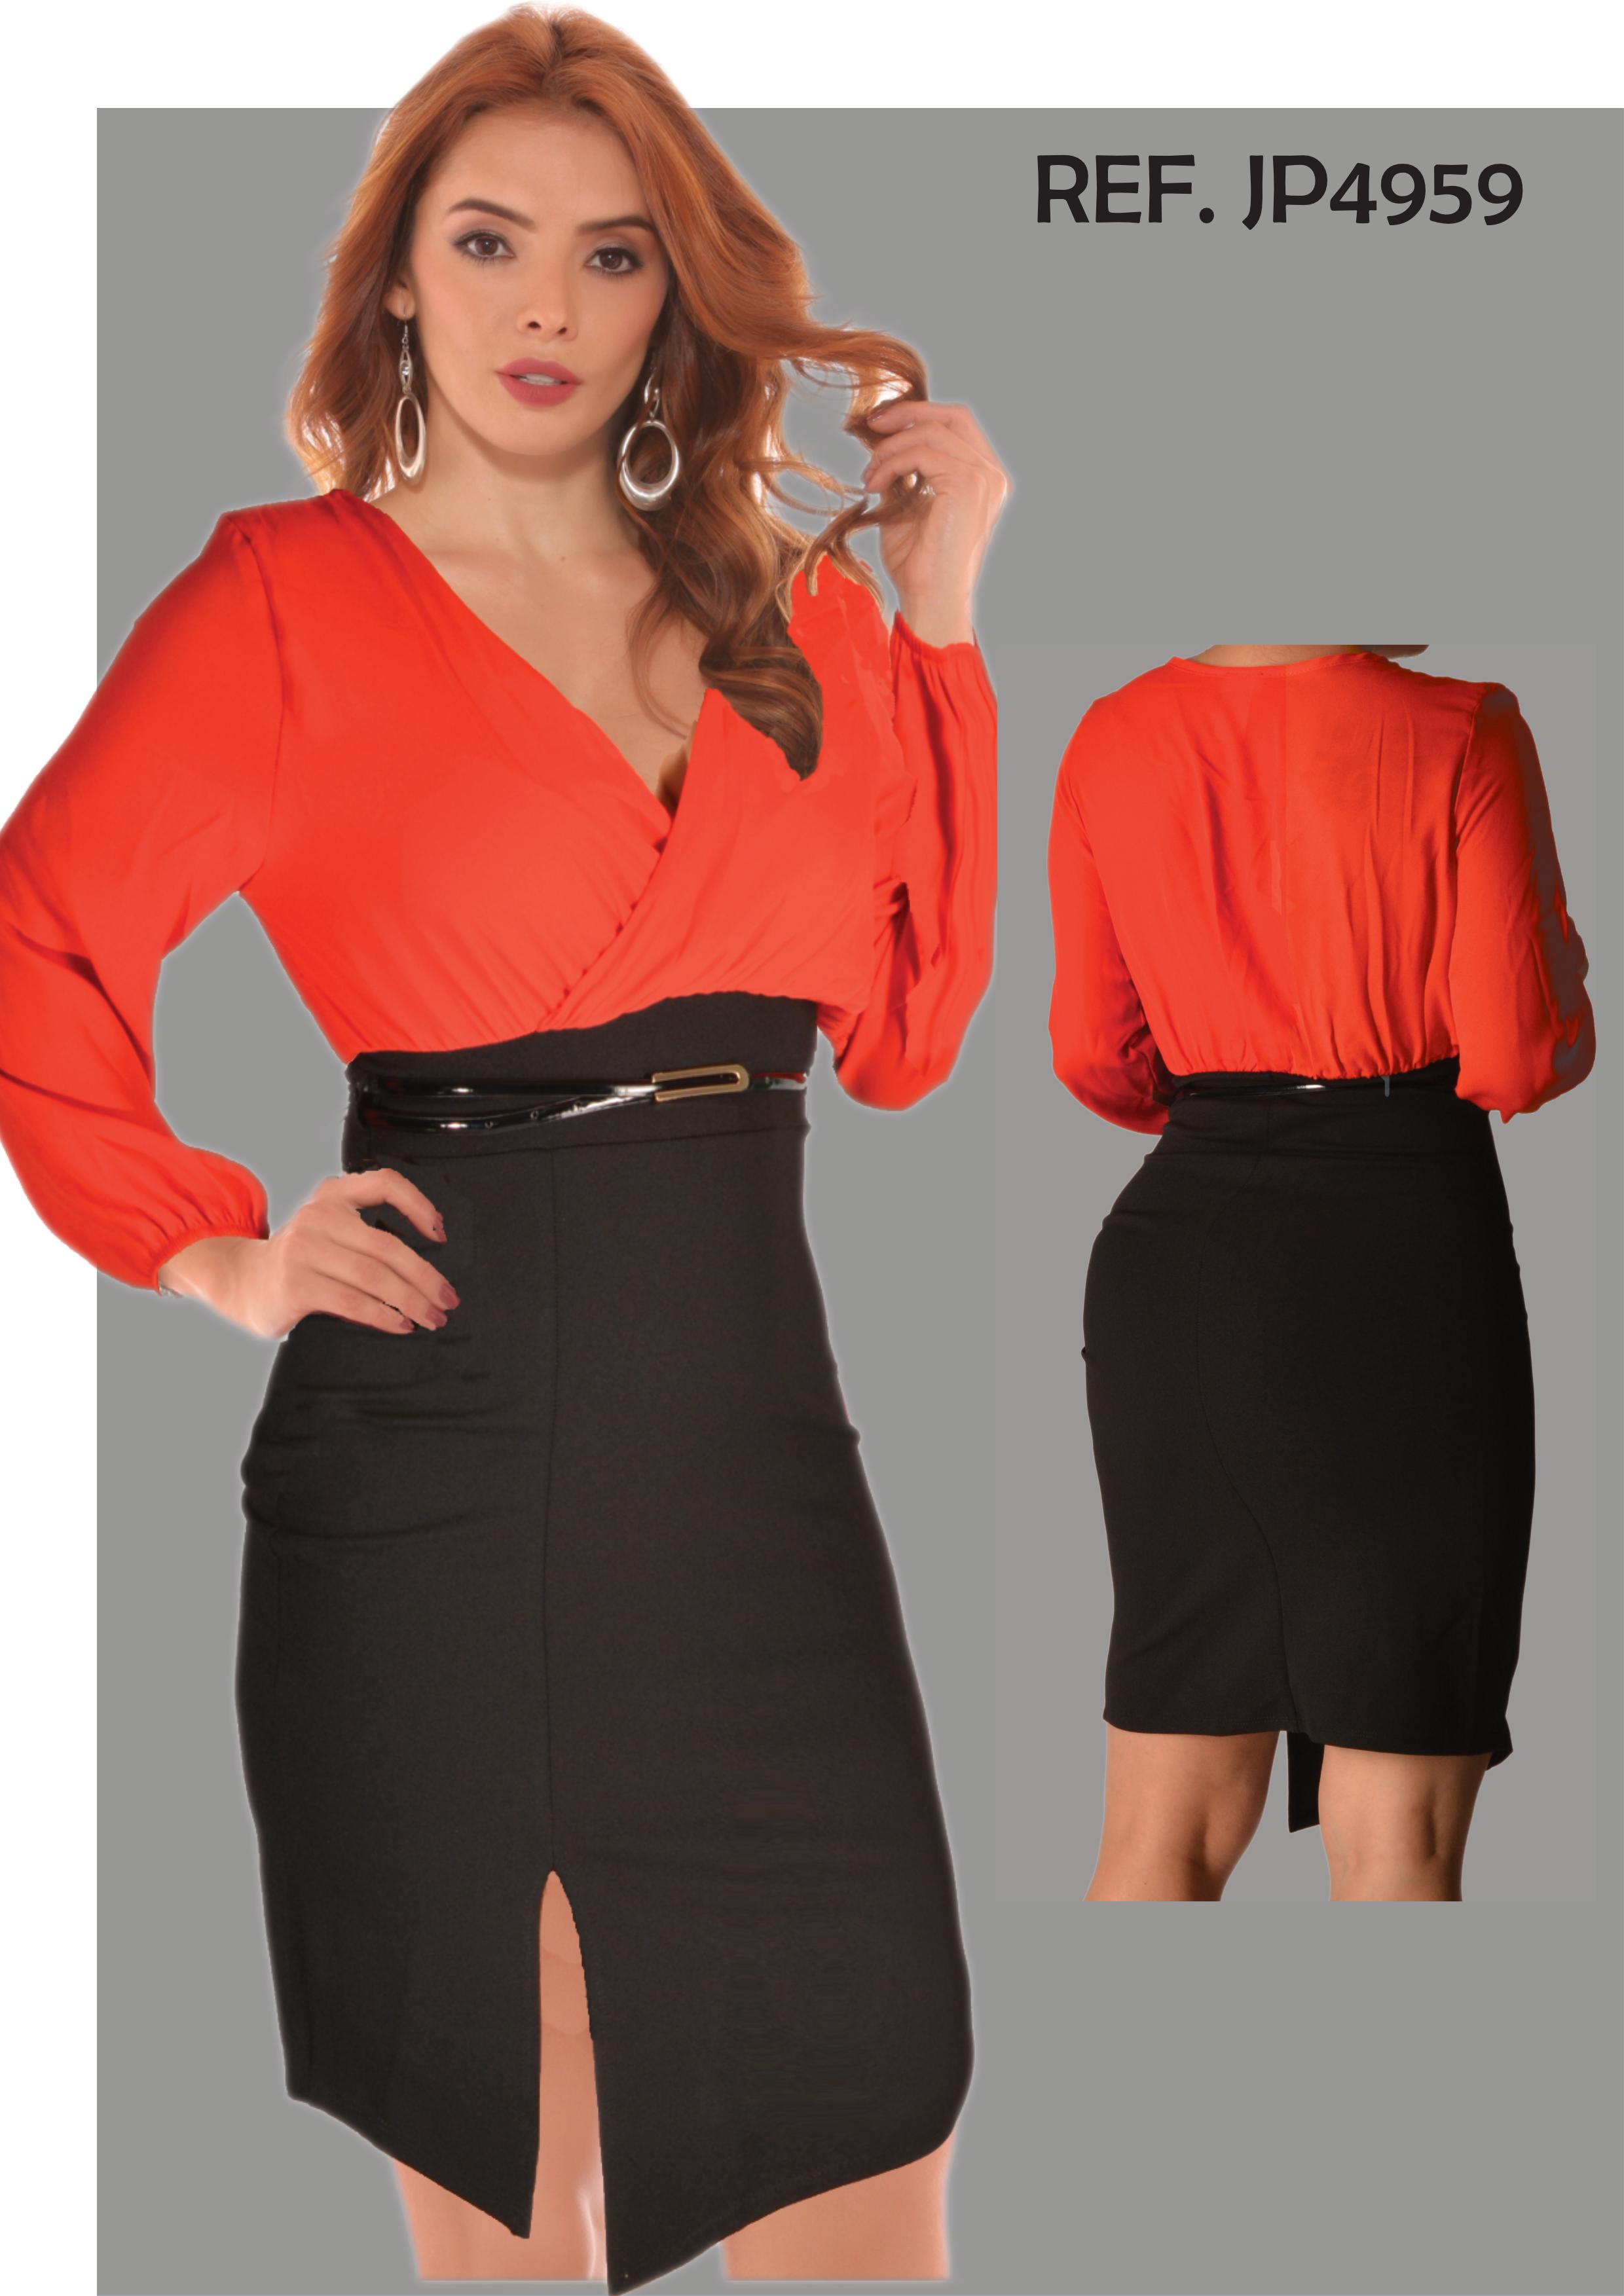 Beautiful Two-tone Party Dress Red Blouse and Black Skirt with Lateral Opening